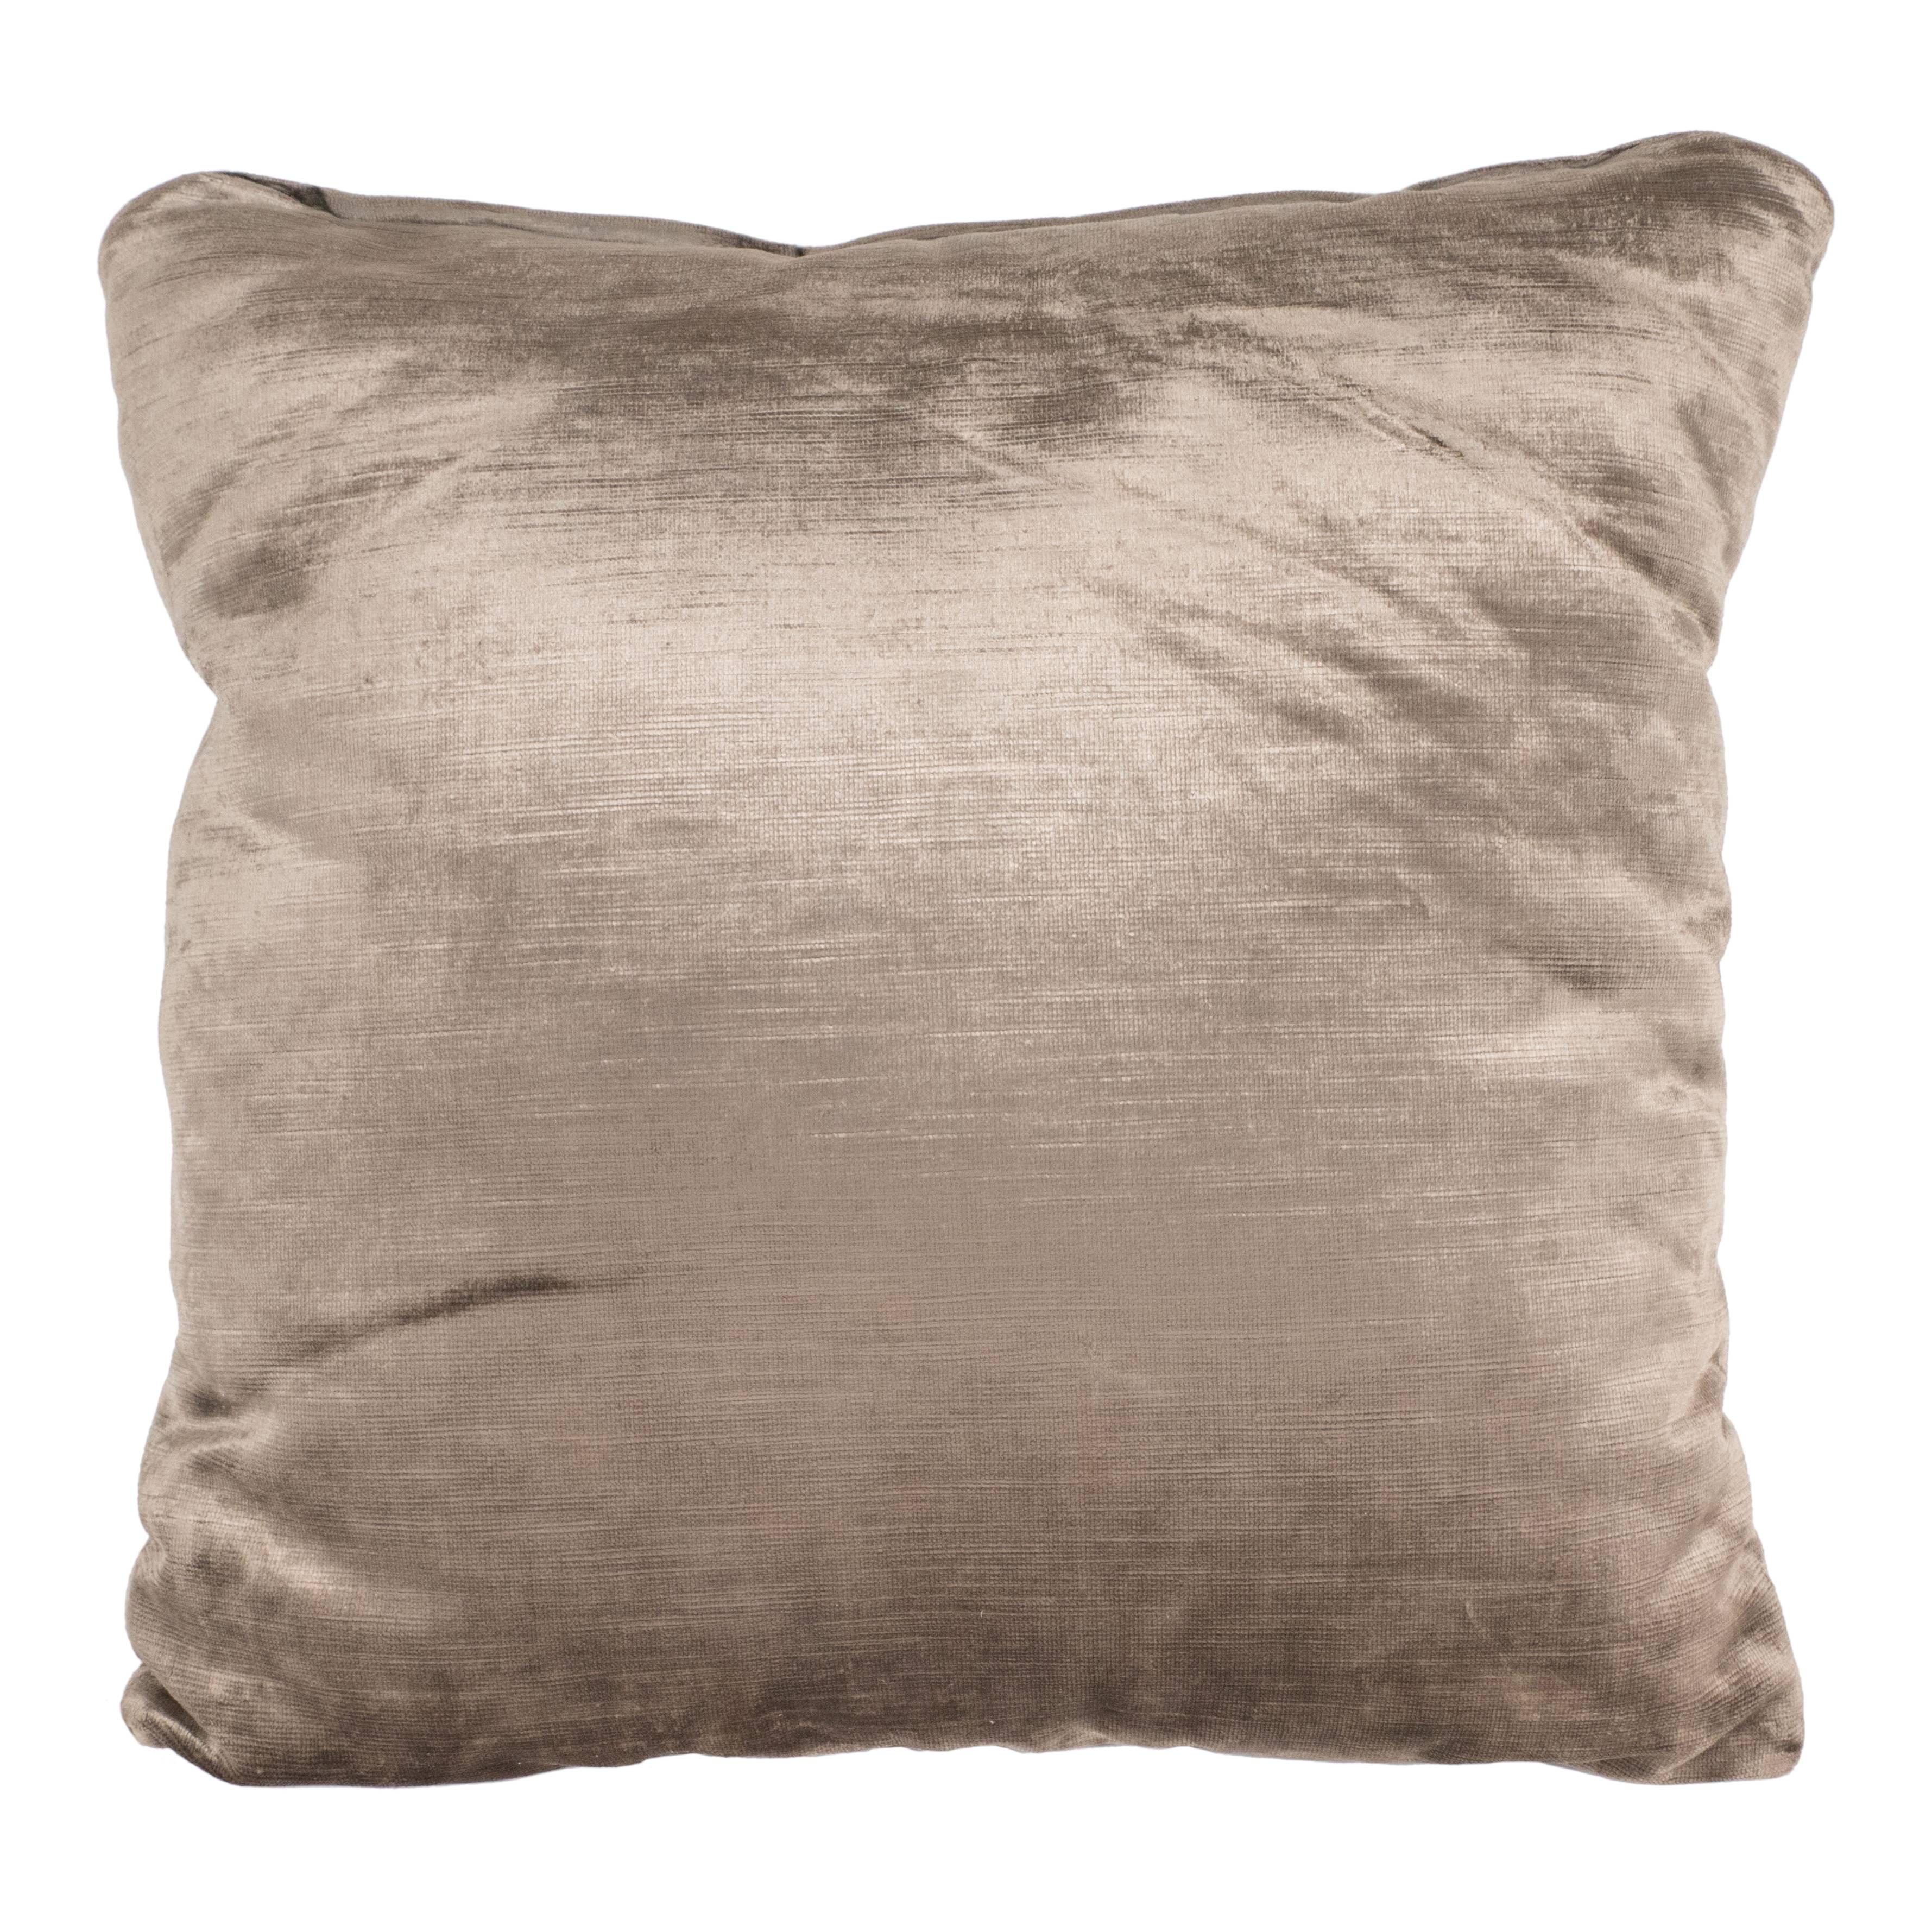 Sophisticated Square Velvet Pillow in Rich Smoked Taupe For Sale